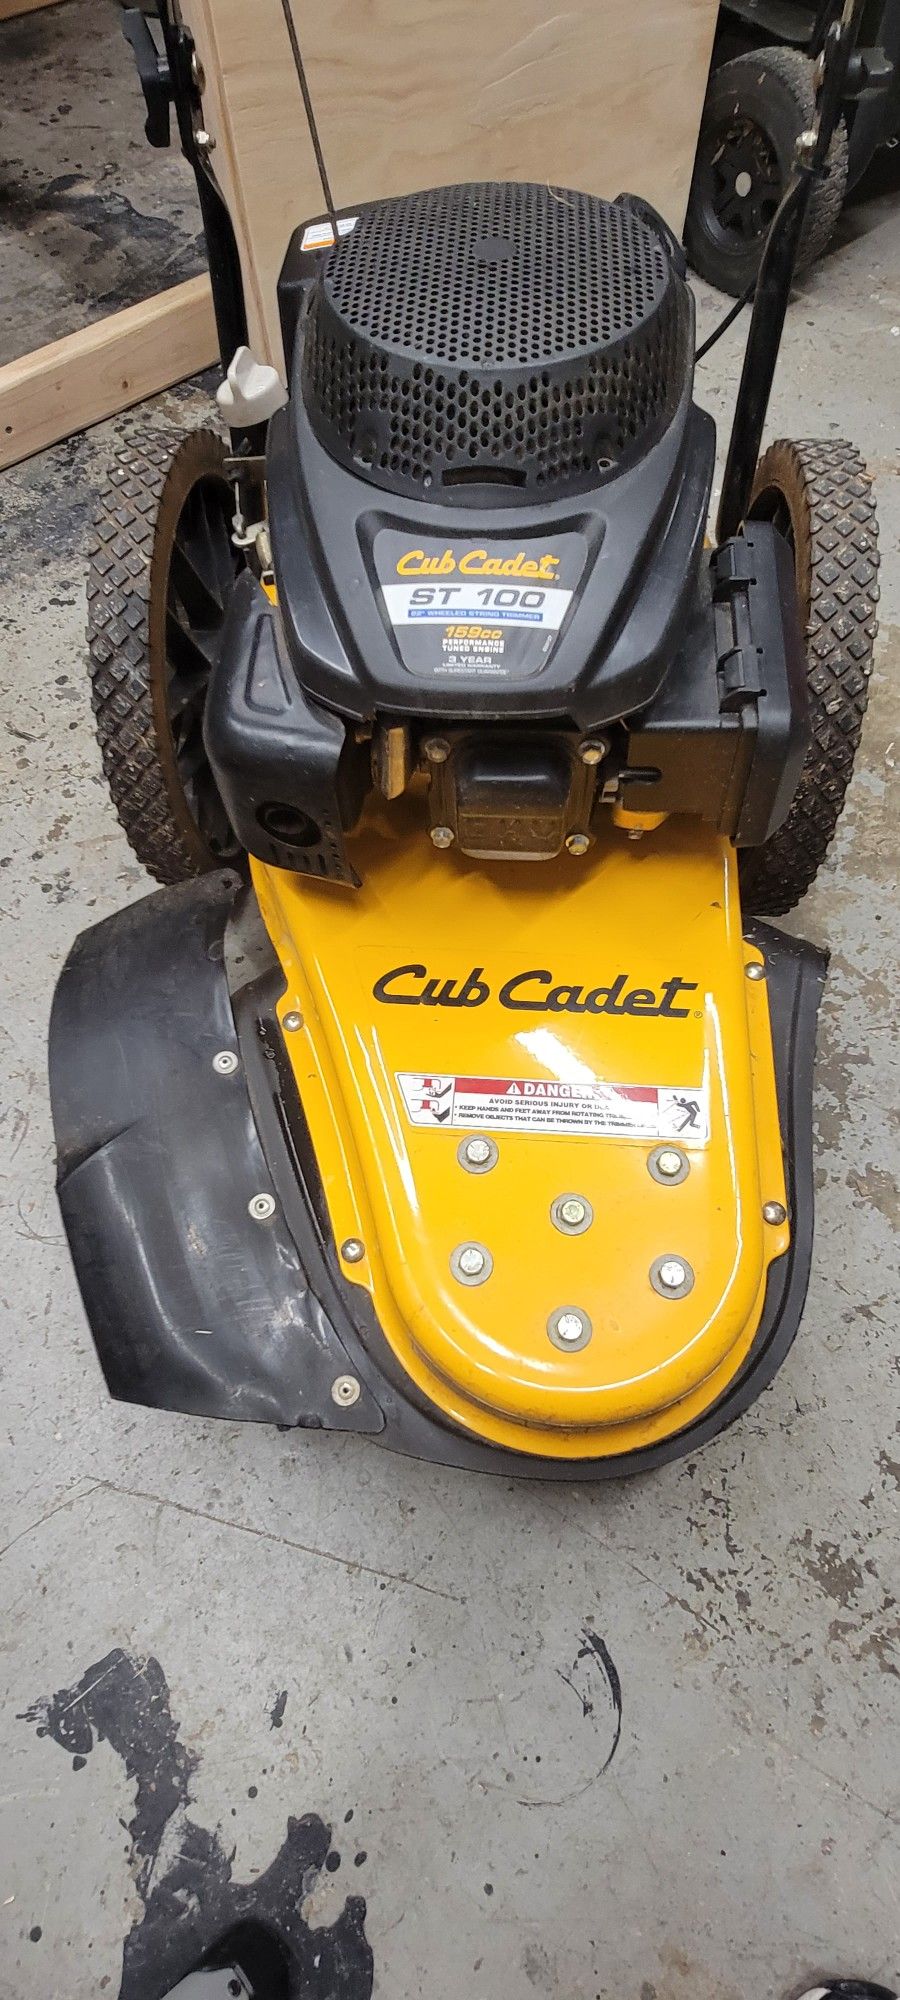 Cub Cadet Wheeled ( Push ) String Trimmer St 100 - Pre-owned 